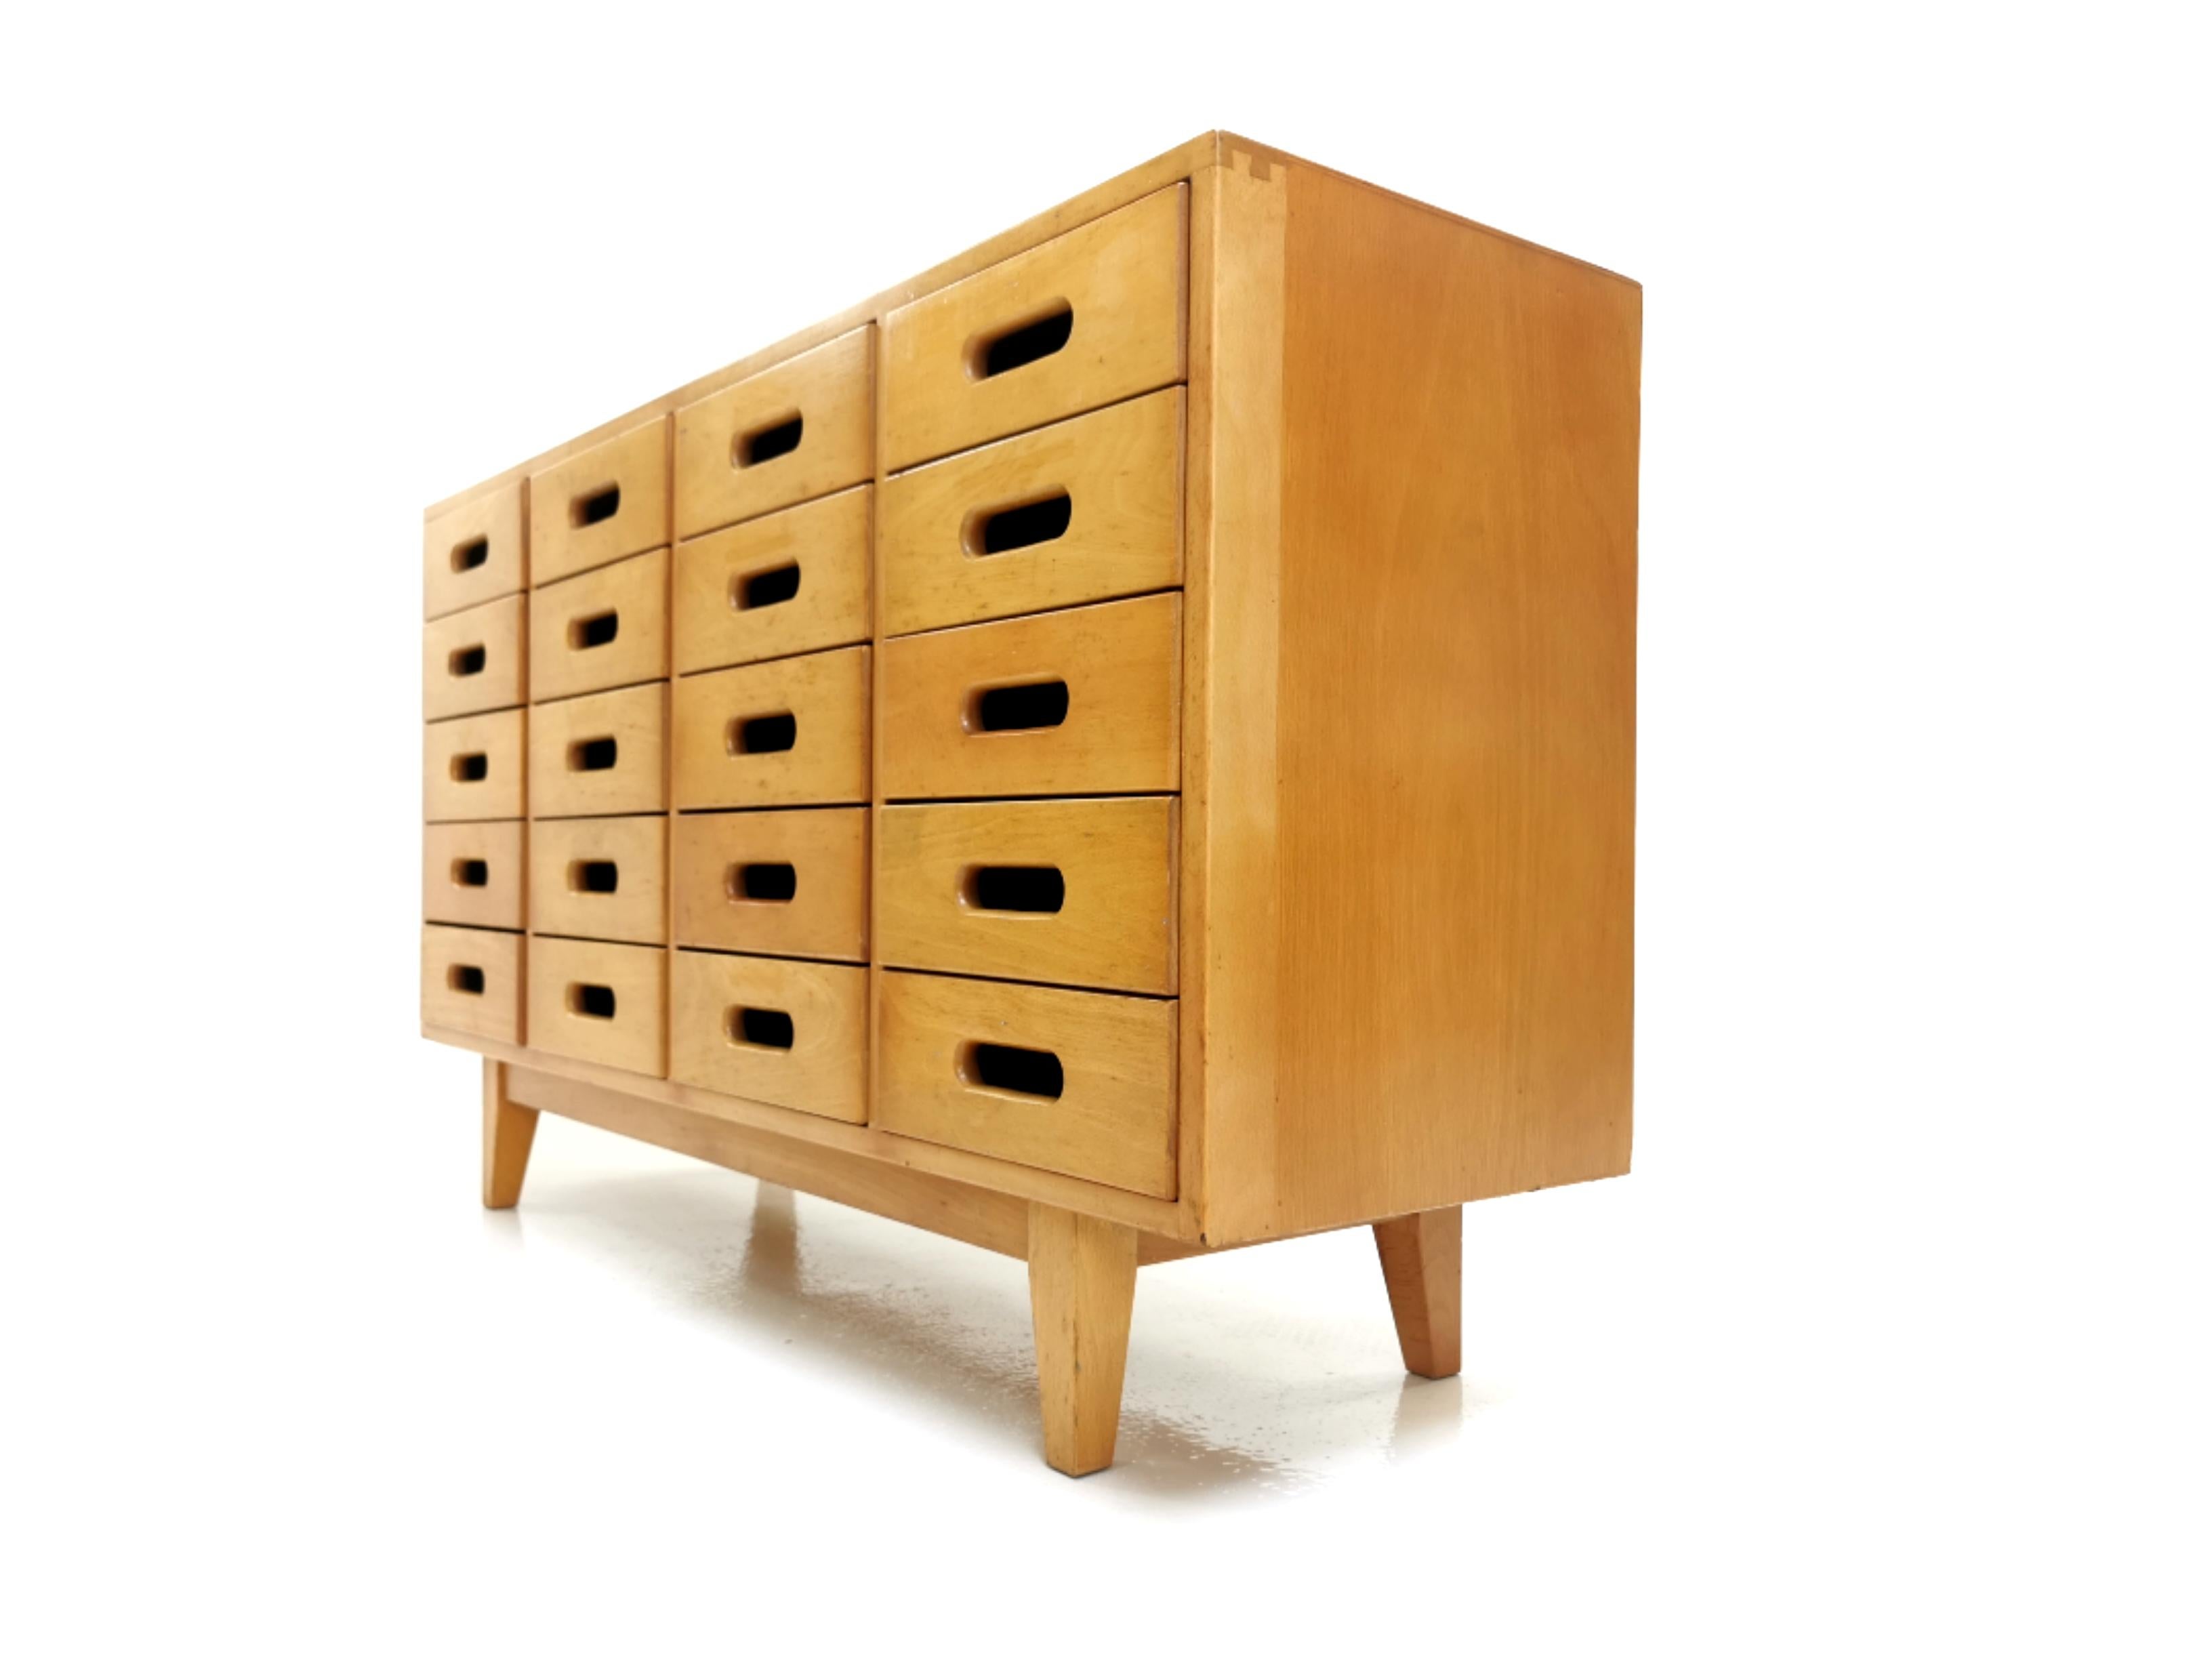 Esavian chest of drawers

Chest of drawers dating from the 1950s, designed by James Leonard and manufactured by Esavian, UK. 

Solid beech case, beech drawer fronts with cutaway handles.

Designed for the Educational Supply Association and as